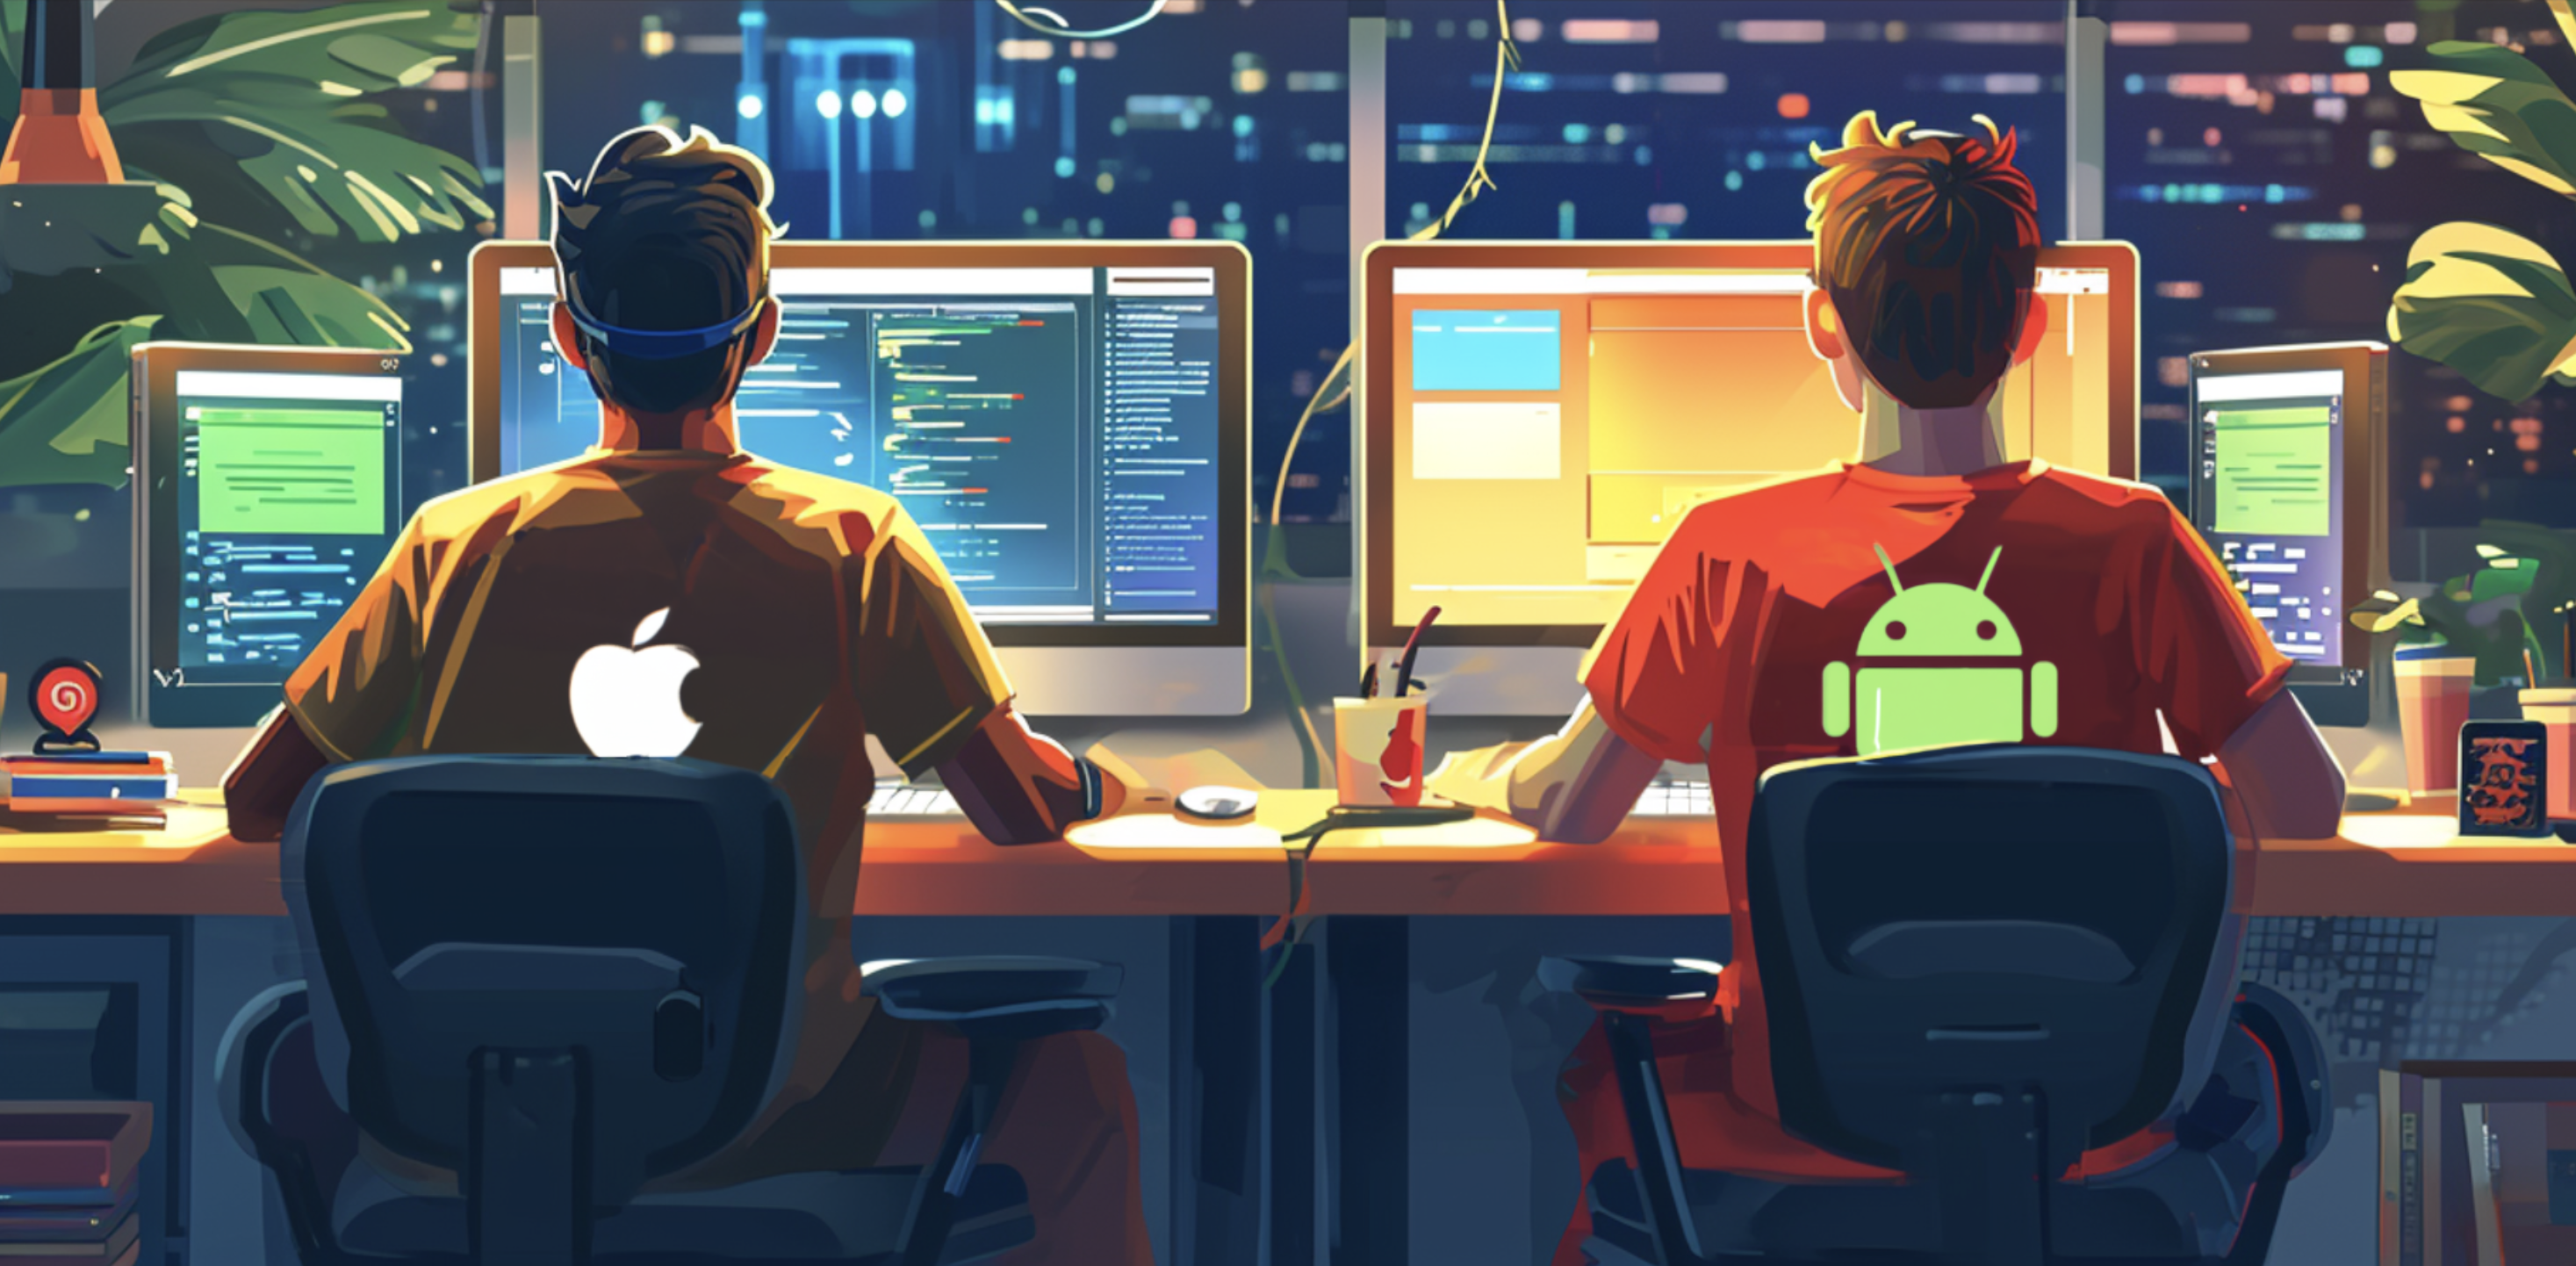 An artistic rendering of two developers coding, one wearing an Apple shirt, the other an Android shirt